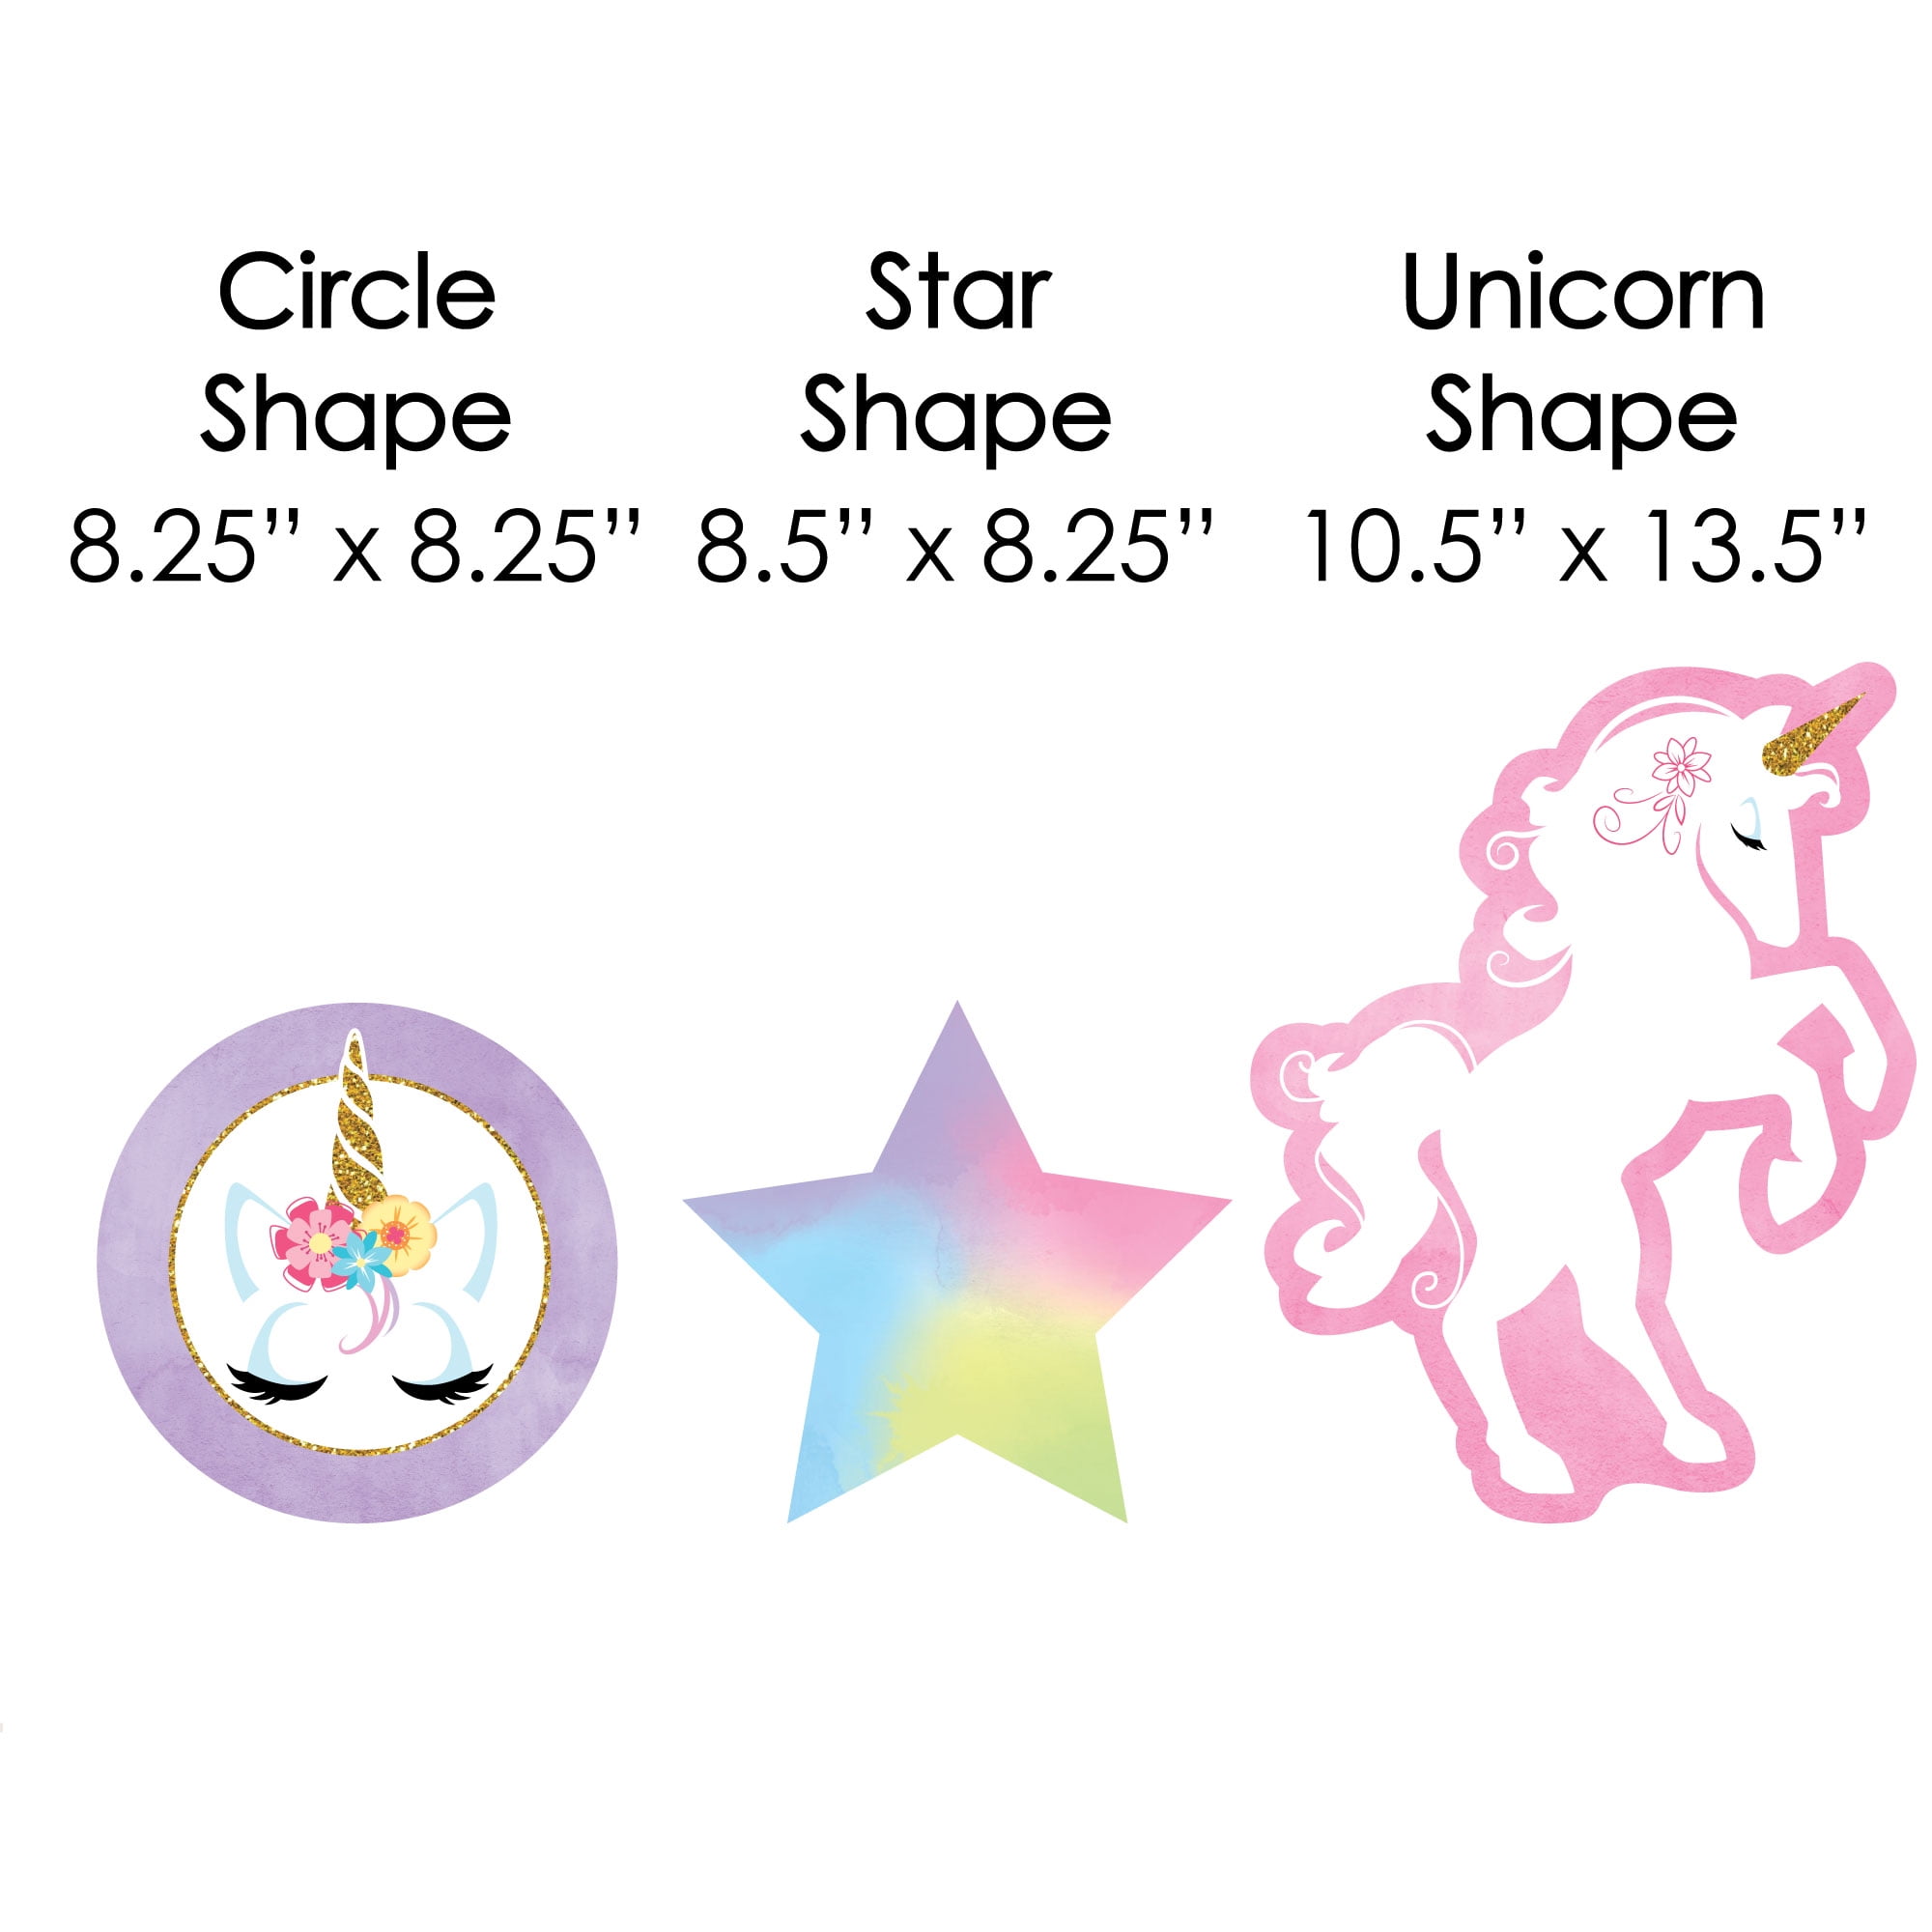 Big Dot Of Happiness Rainbow Unicorn - Magical Unicorn Party Decor - 6 Beer  Bottle Labels & 1 Carrier - Assorted Pre